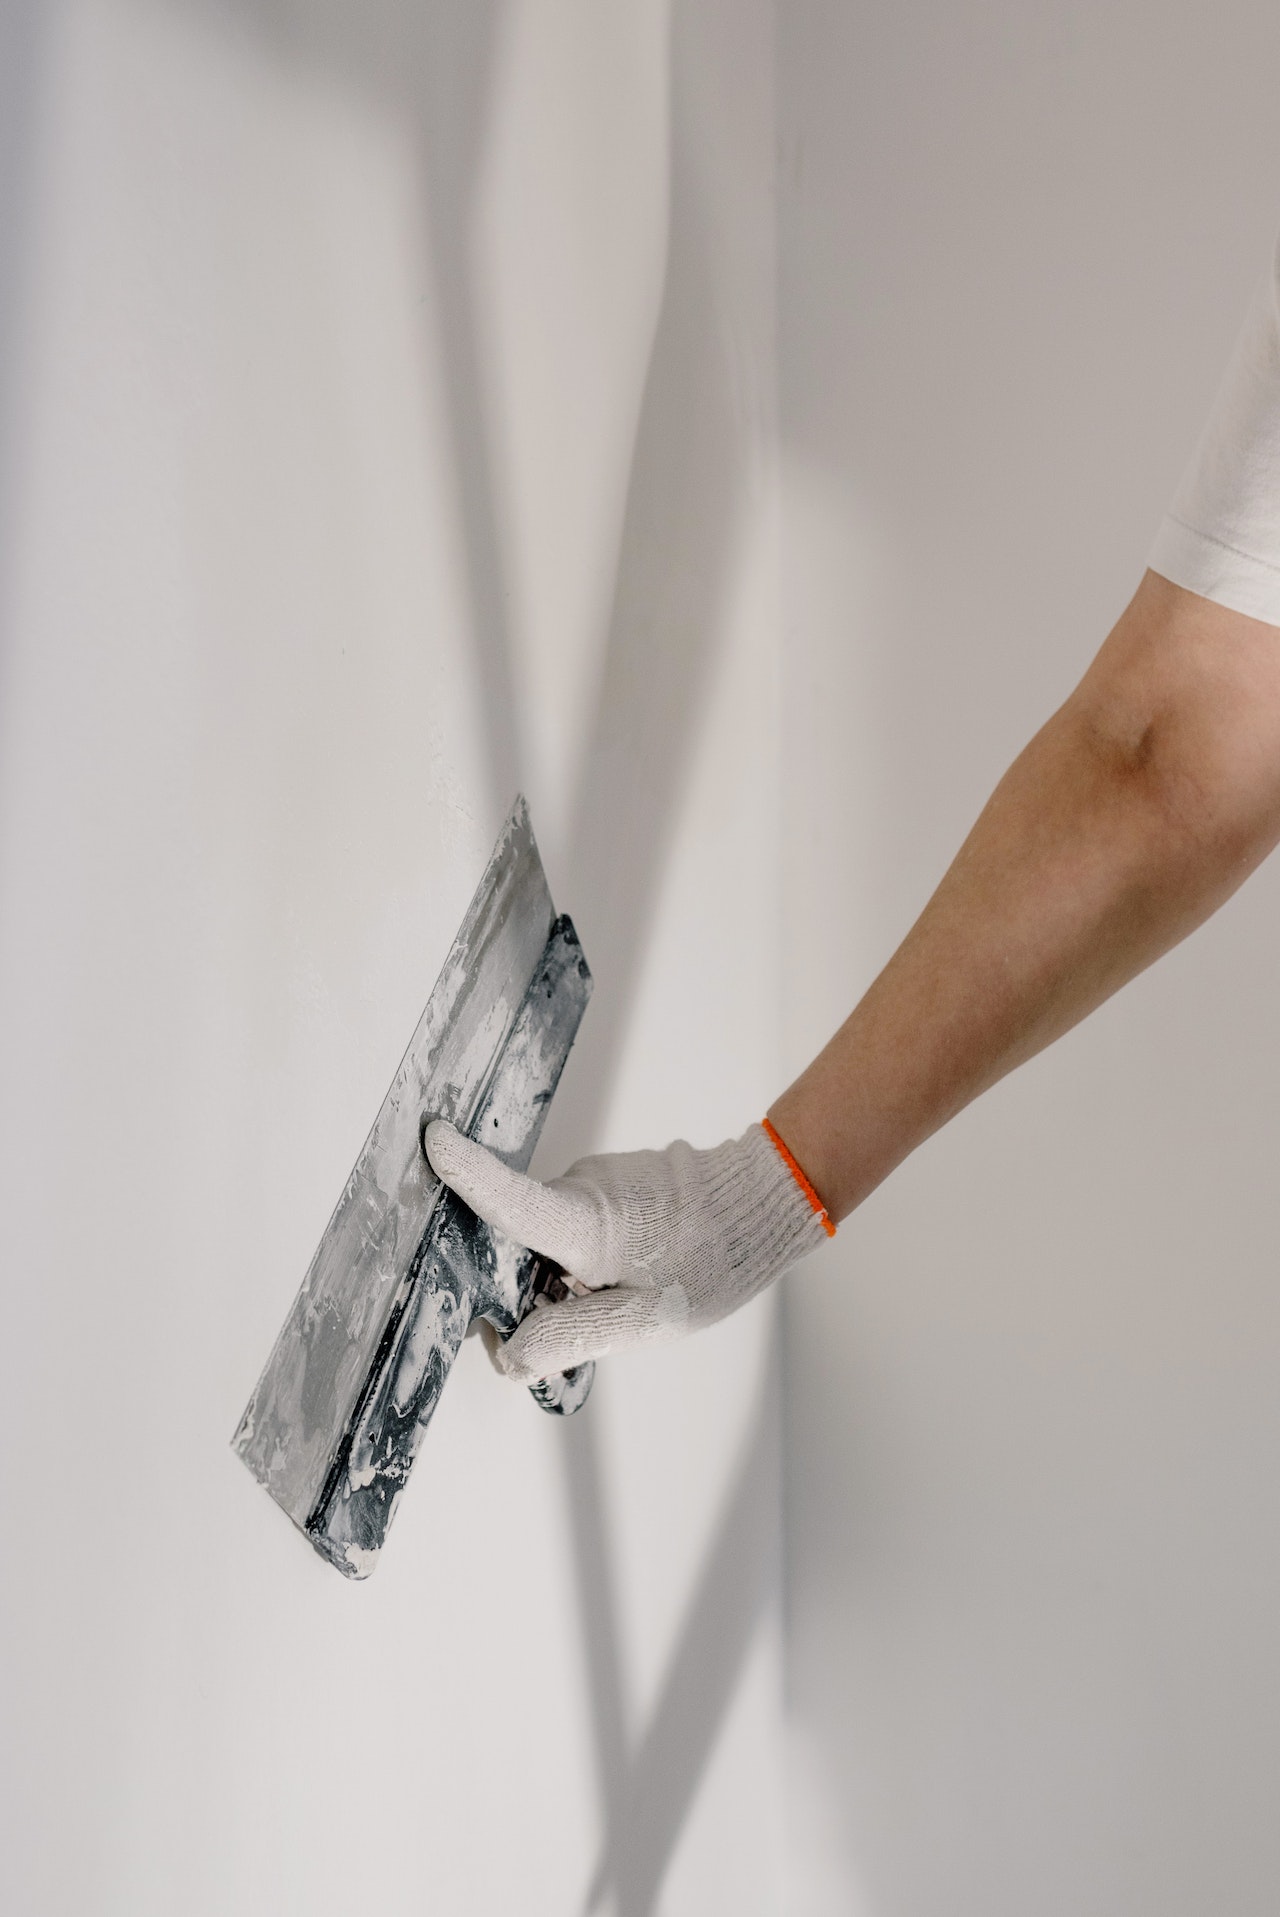 Professional Plasterer In Lagos: 3 Things You Should Know